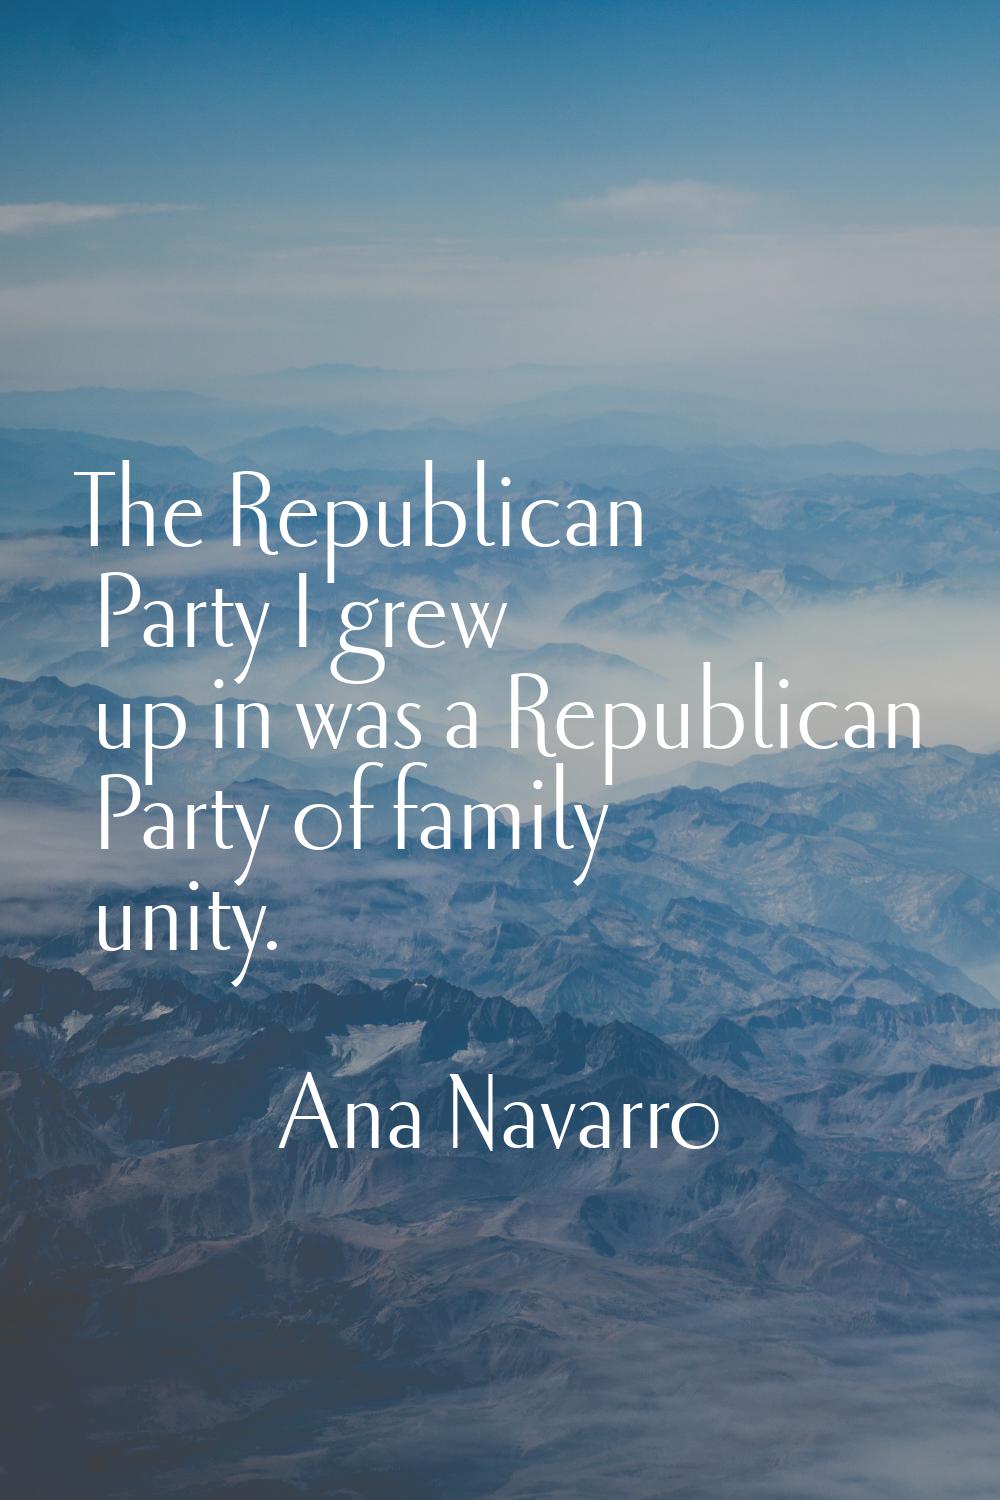 The Republican Party I grew up in was a Republican Party of family unity.